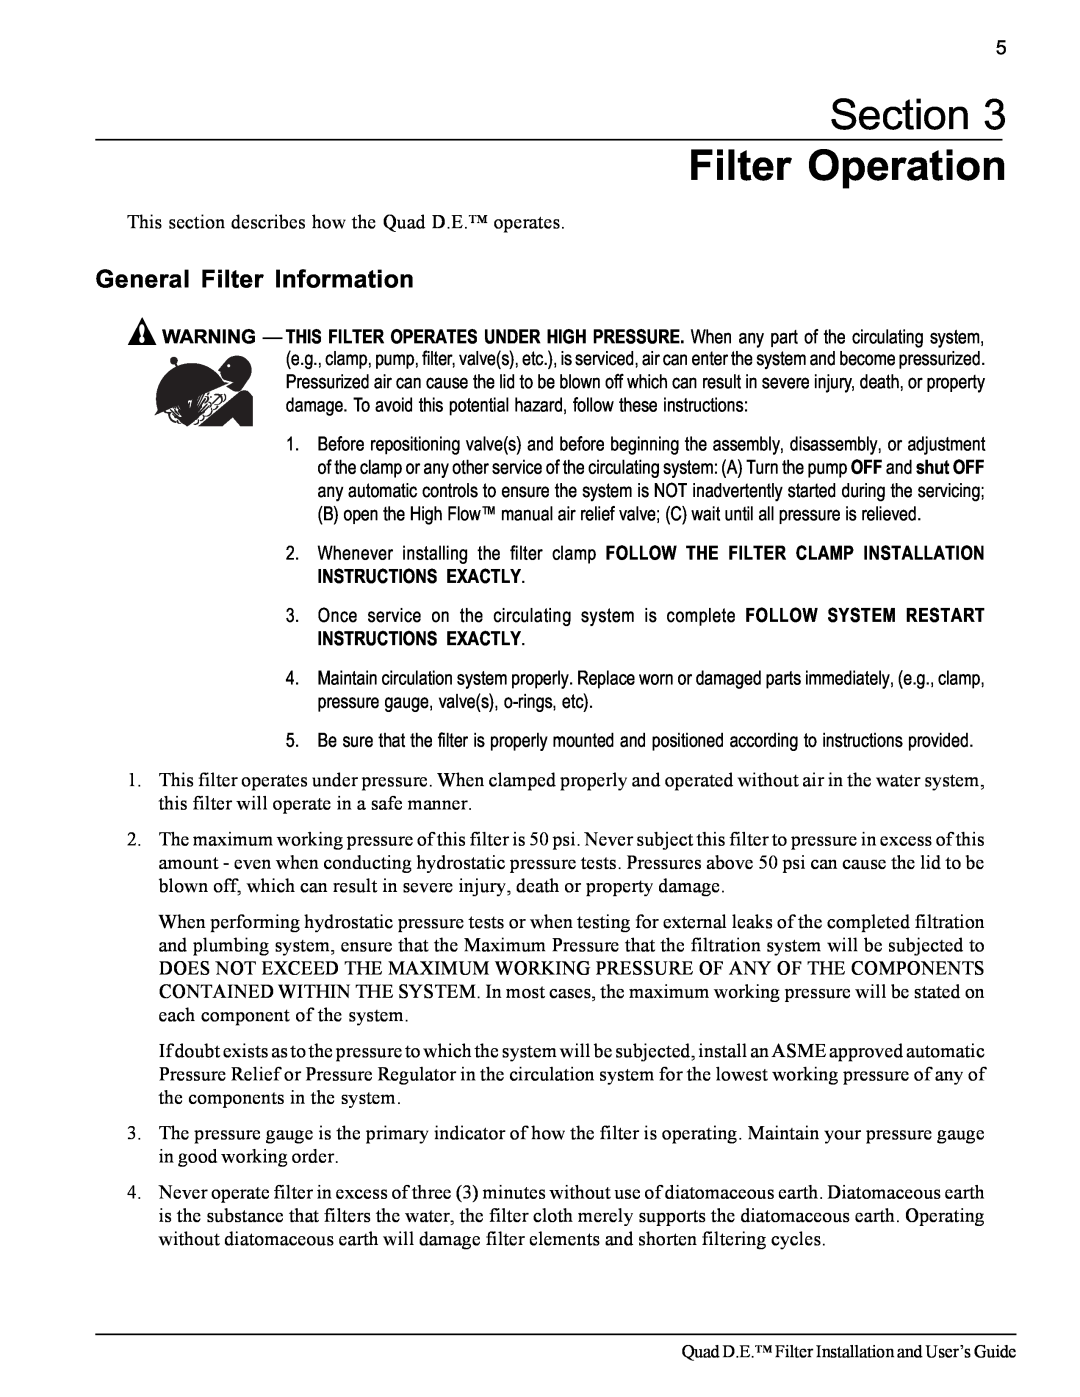 Pentair D.E. Cartridge Style Filter important safety instructions Section Filter Operation, General Filter Information 